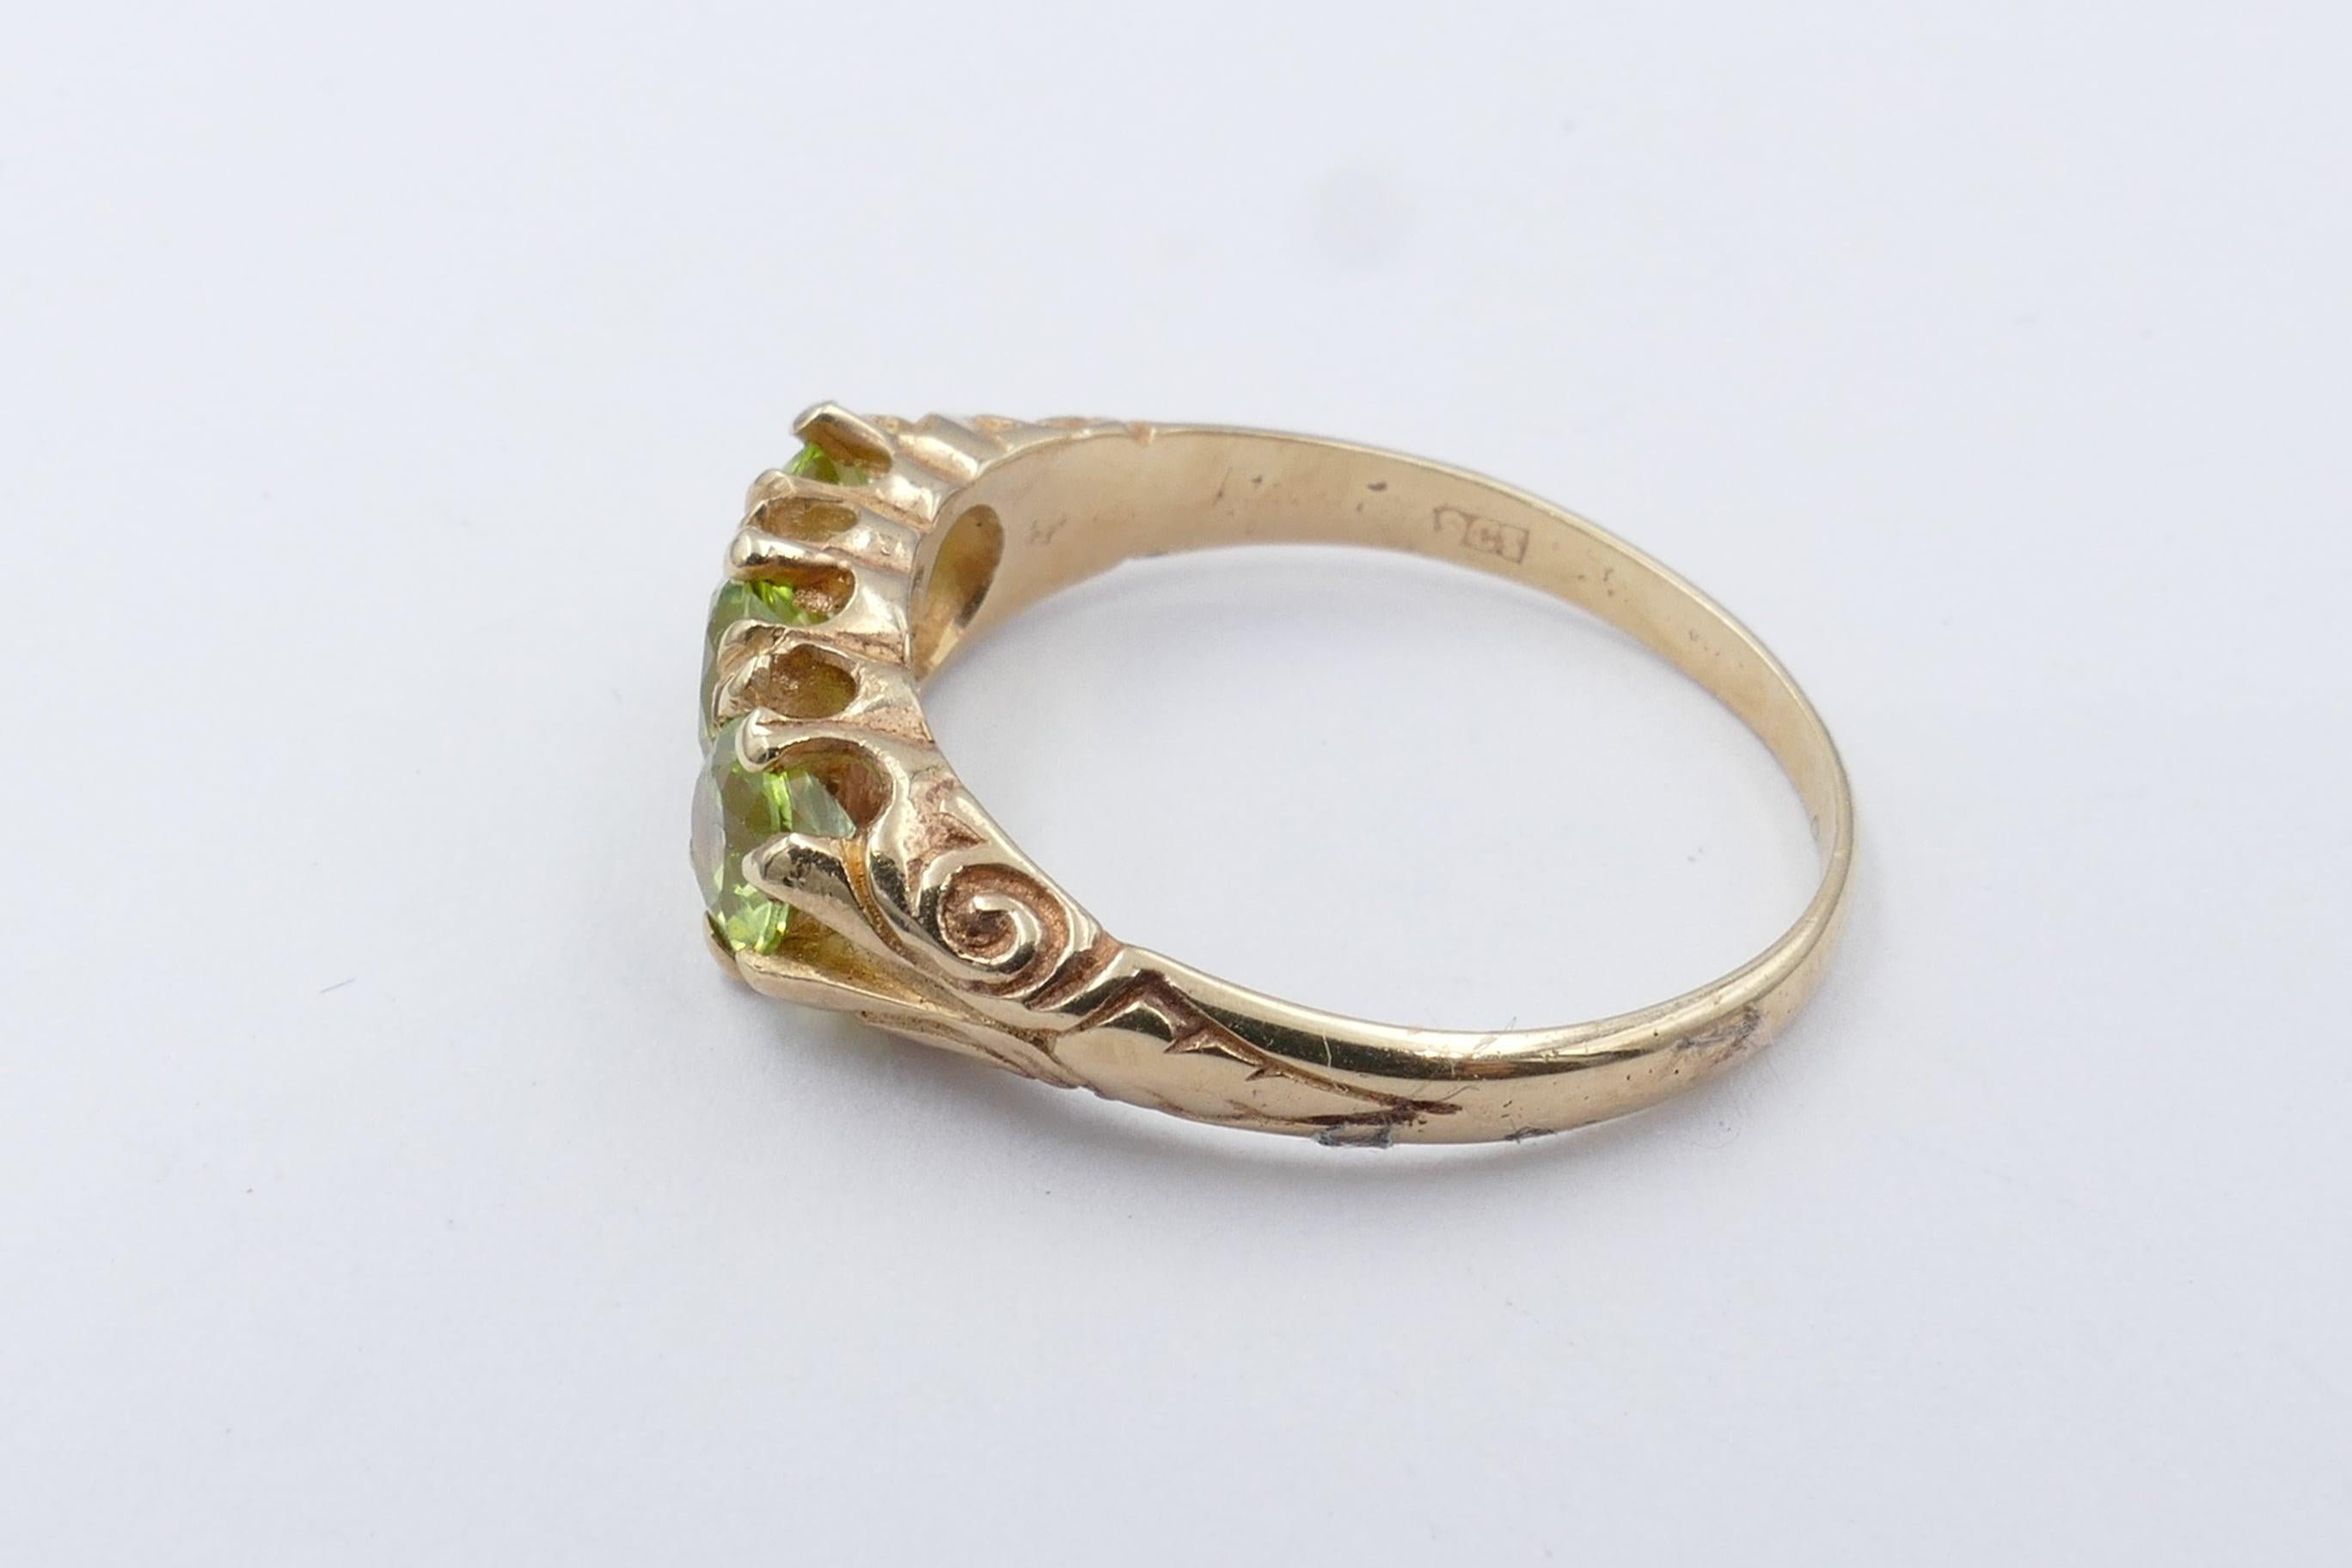 3 Medium light green Peridots are the Centrepiece of this traditional Victorian/Edwardian Band Ring.
The Stones are Round Cut, Clarity eye-clean, Claw Set in a Carved Foliate Gallery.
The Band is half round, reverse tapered, and measures 1.65mm wide